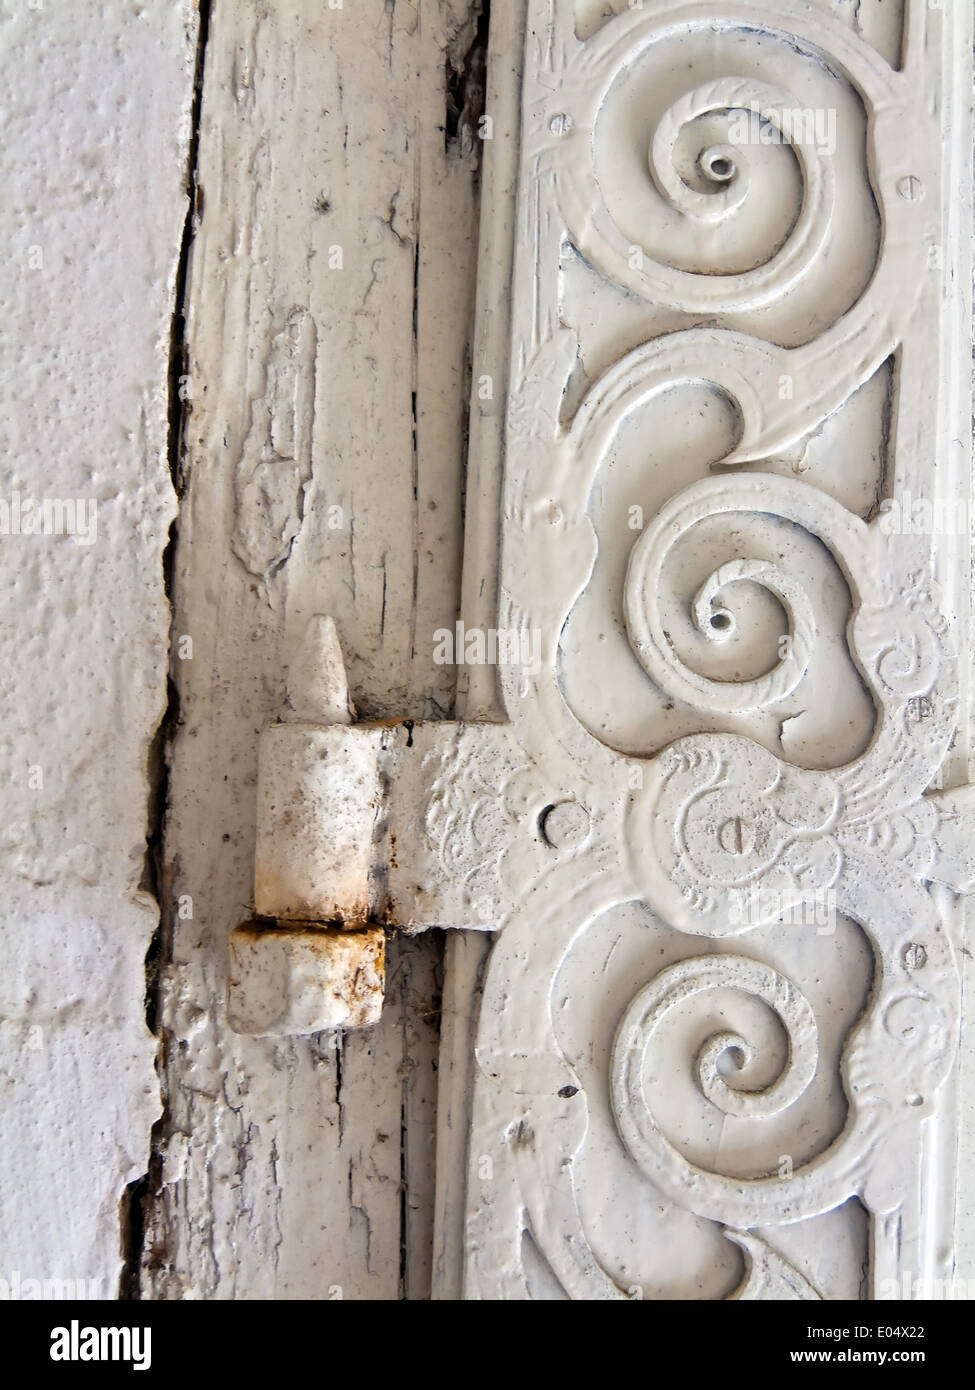 Old hinge of a T?re of a dwelling house, Altes Scharnier einer Tuere eines Wohnhauses Stock Photo